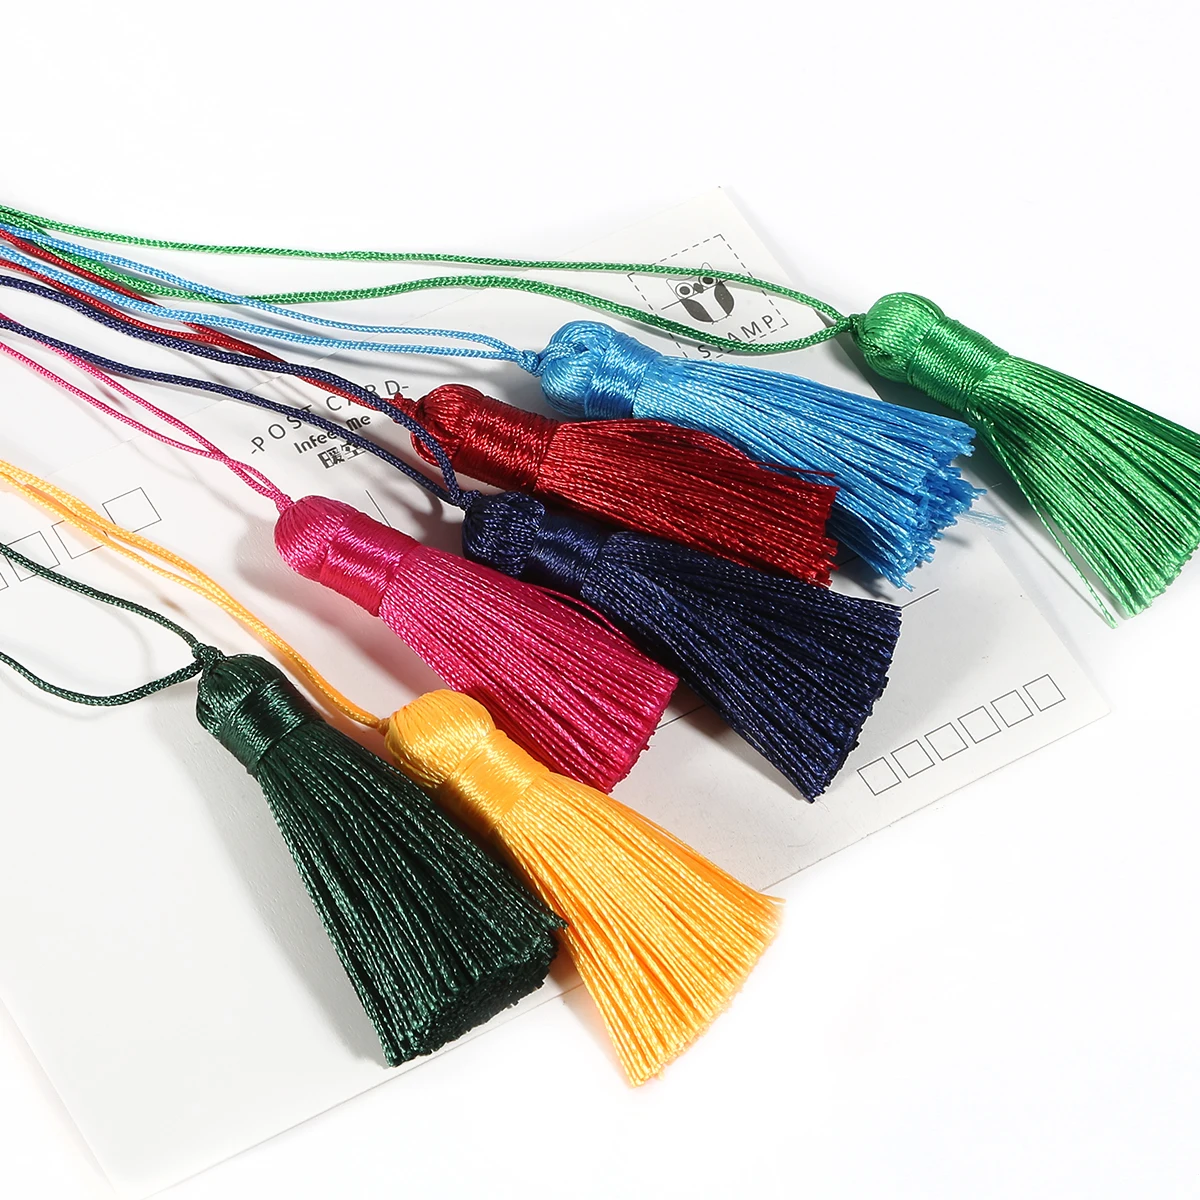 1pcs 5.5cm Colorful Cotton Silk Tassel Short Tassel For DIY Crafts Curtains Hanging Decoration Jewelry Making Accessories